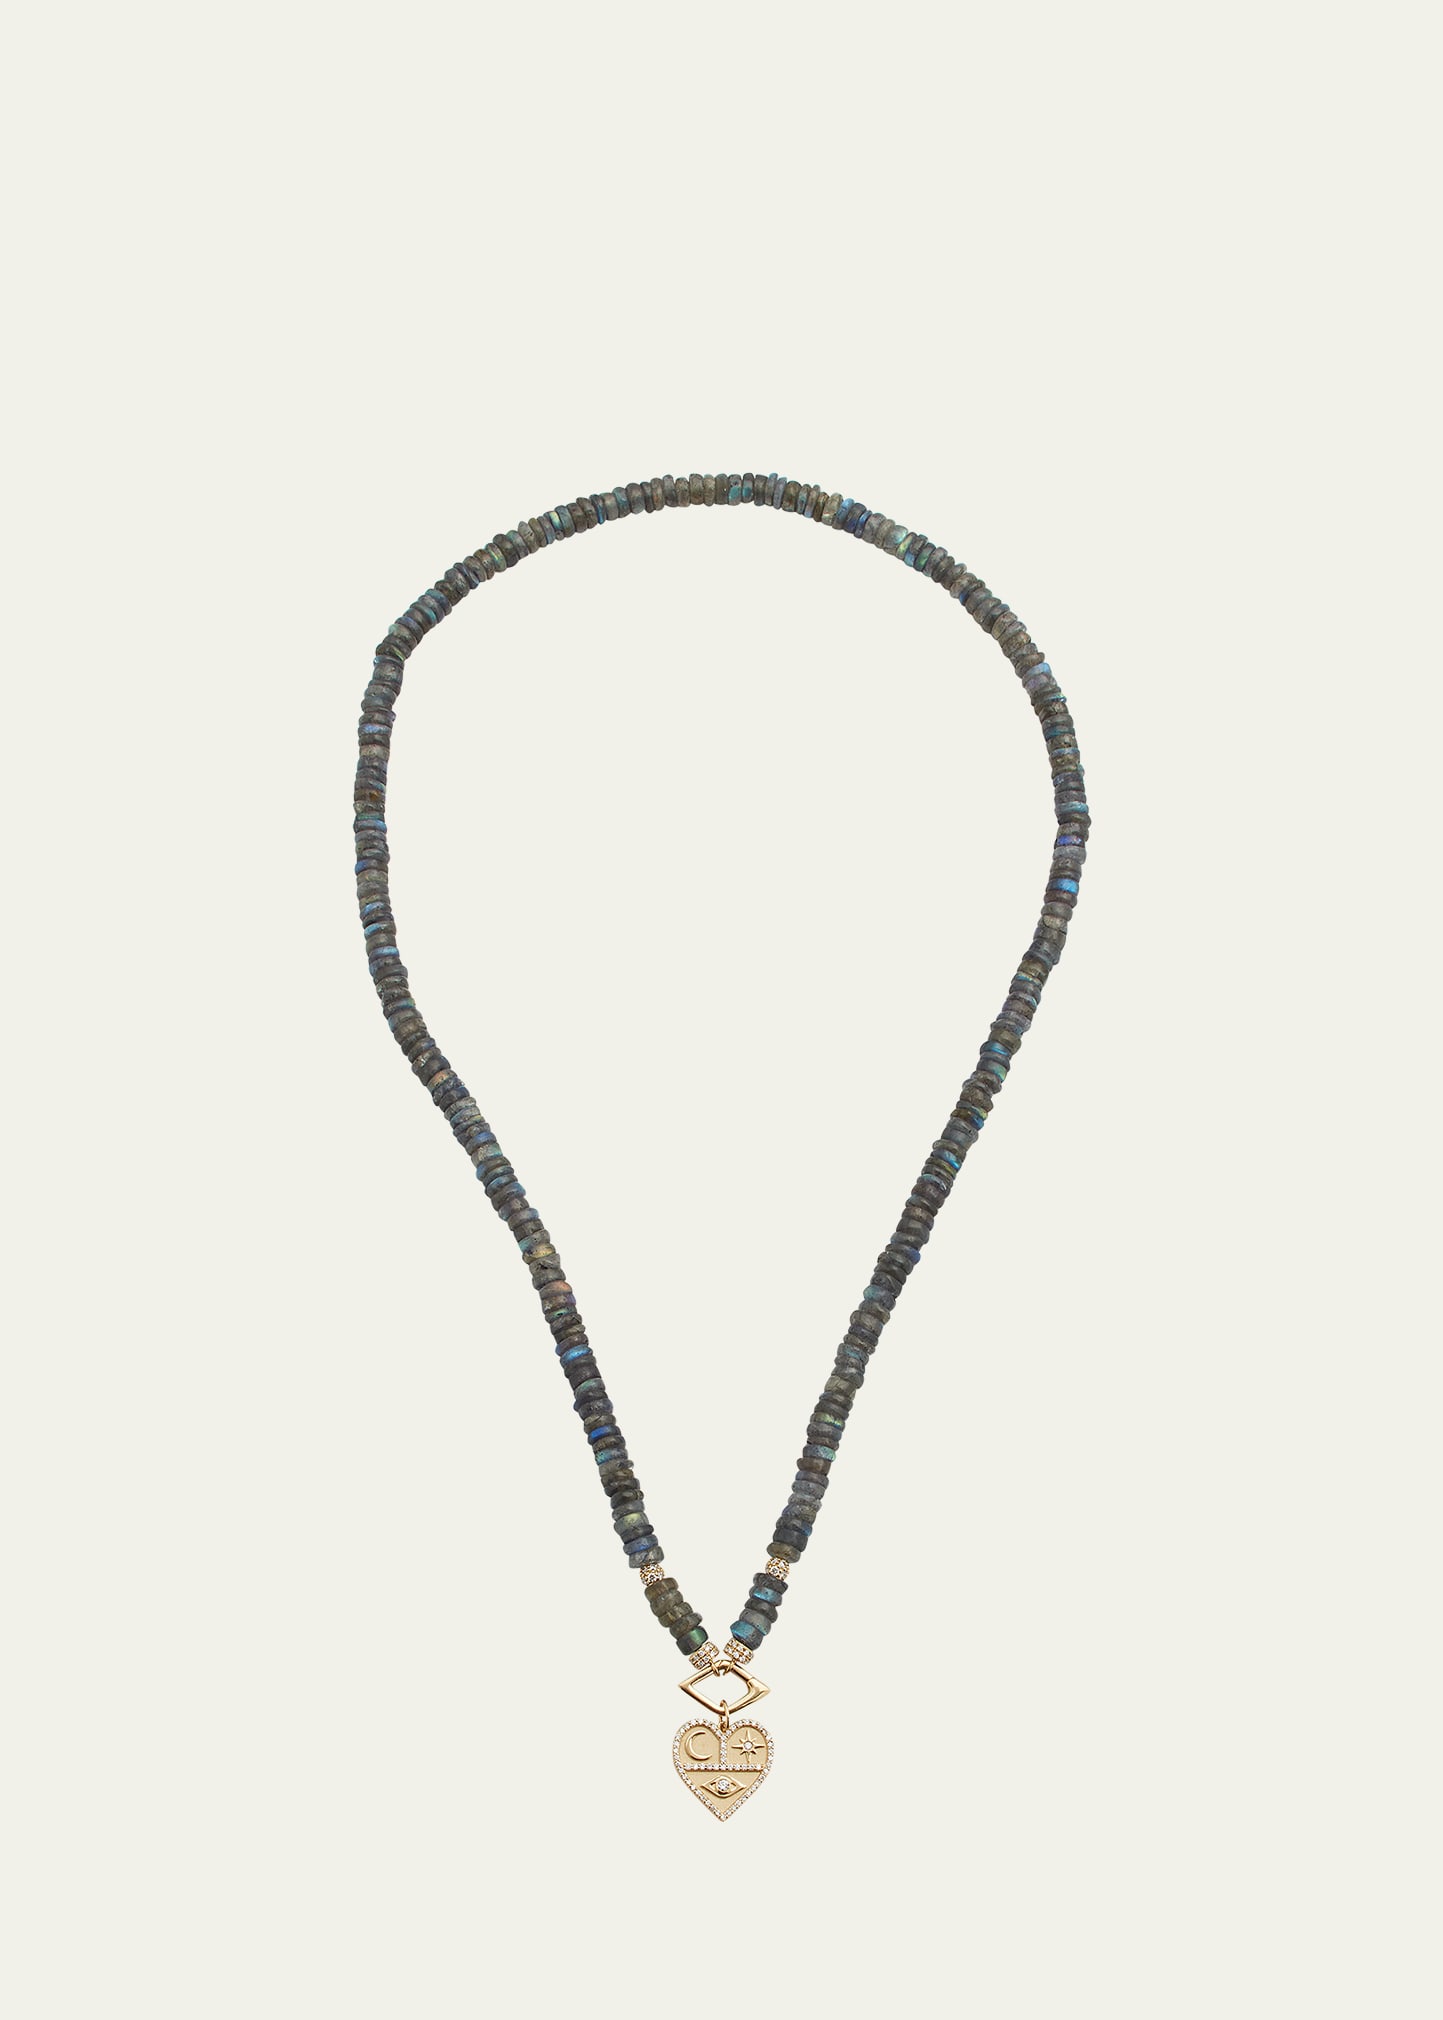 14K Diamond and Labradorite Necklace with Icon Heart Charm